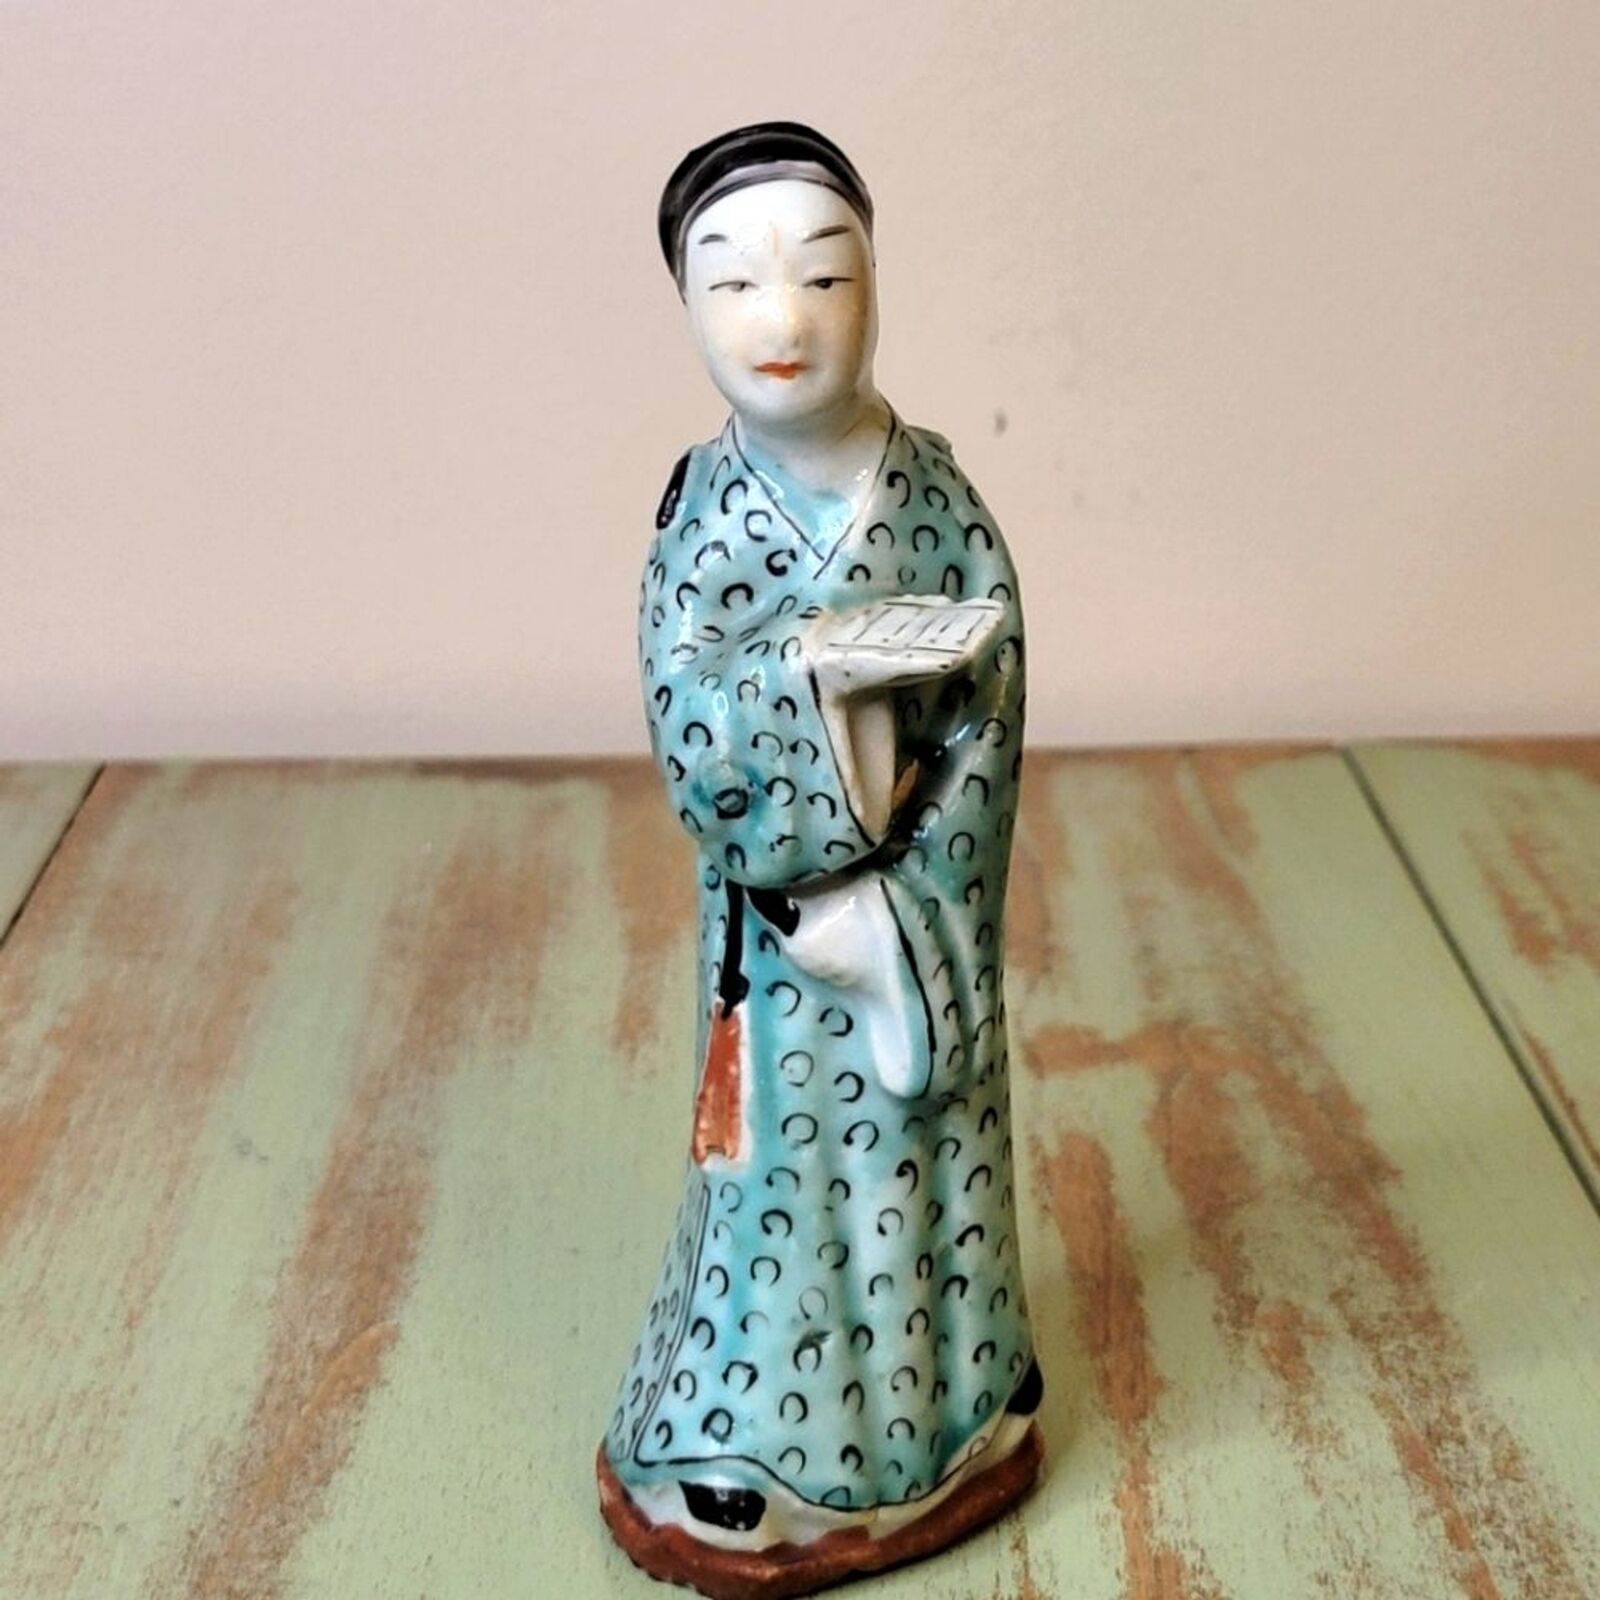 1920s Chinese Male Chinoiserie Figurine - Antique